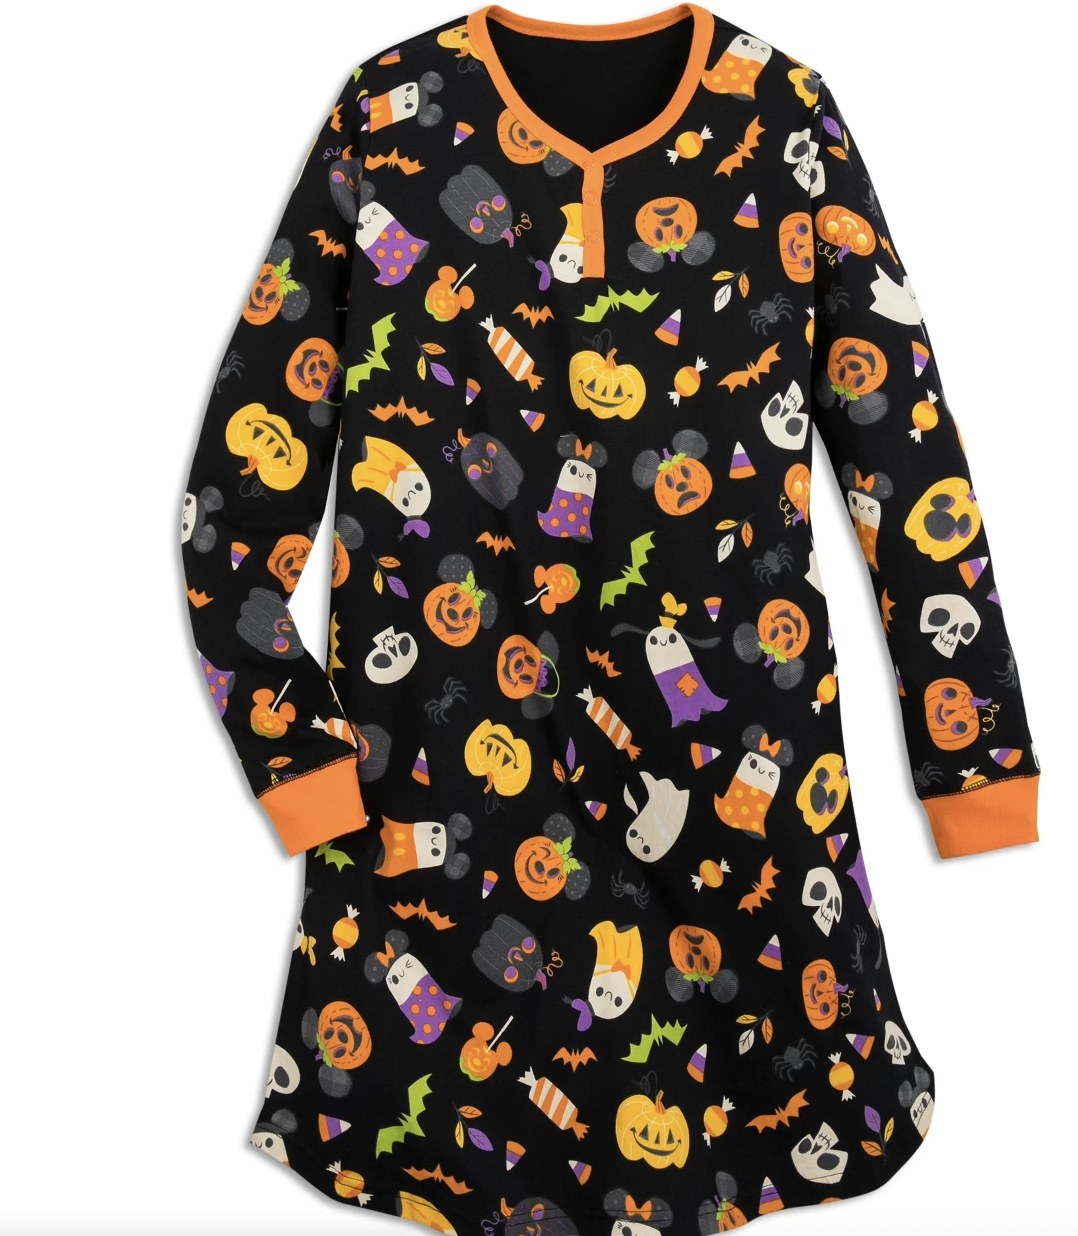 Long sleeve Mickey Mouse pumpkin Halloween nightshirt with bats, candy and ghosts